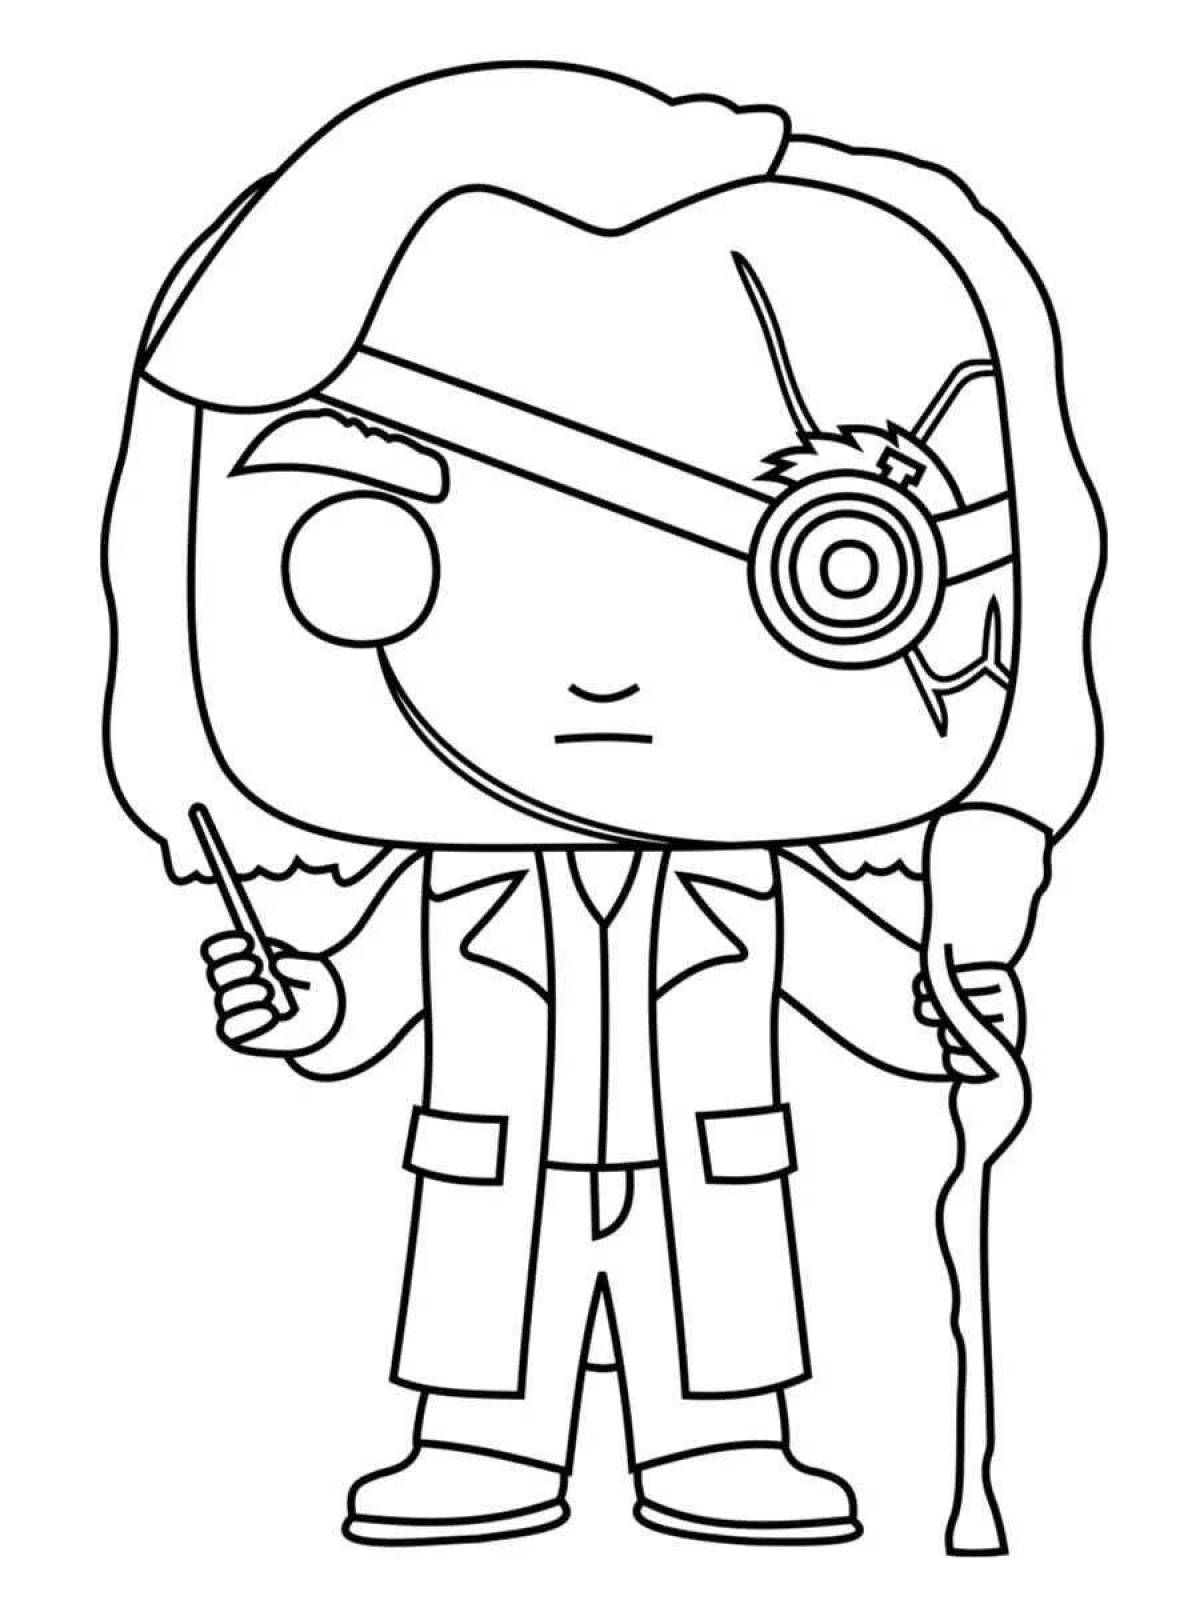 Color madness funko pop coloring page